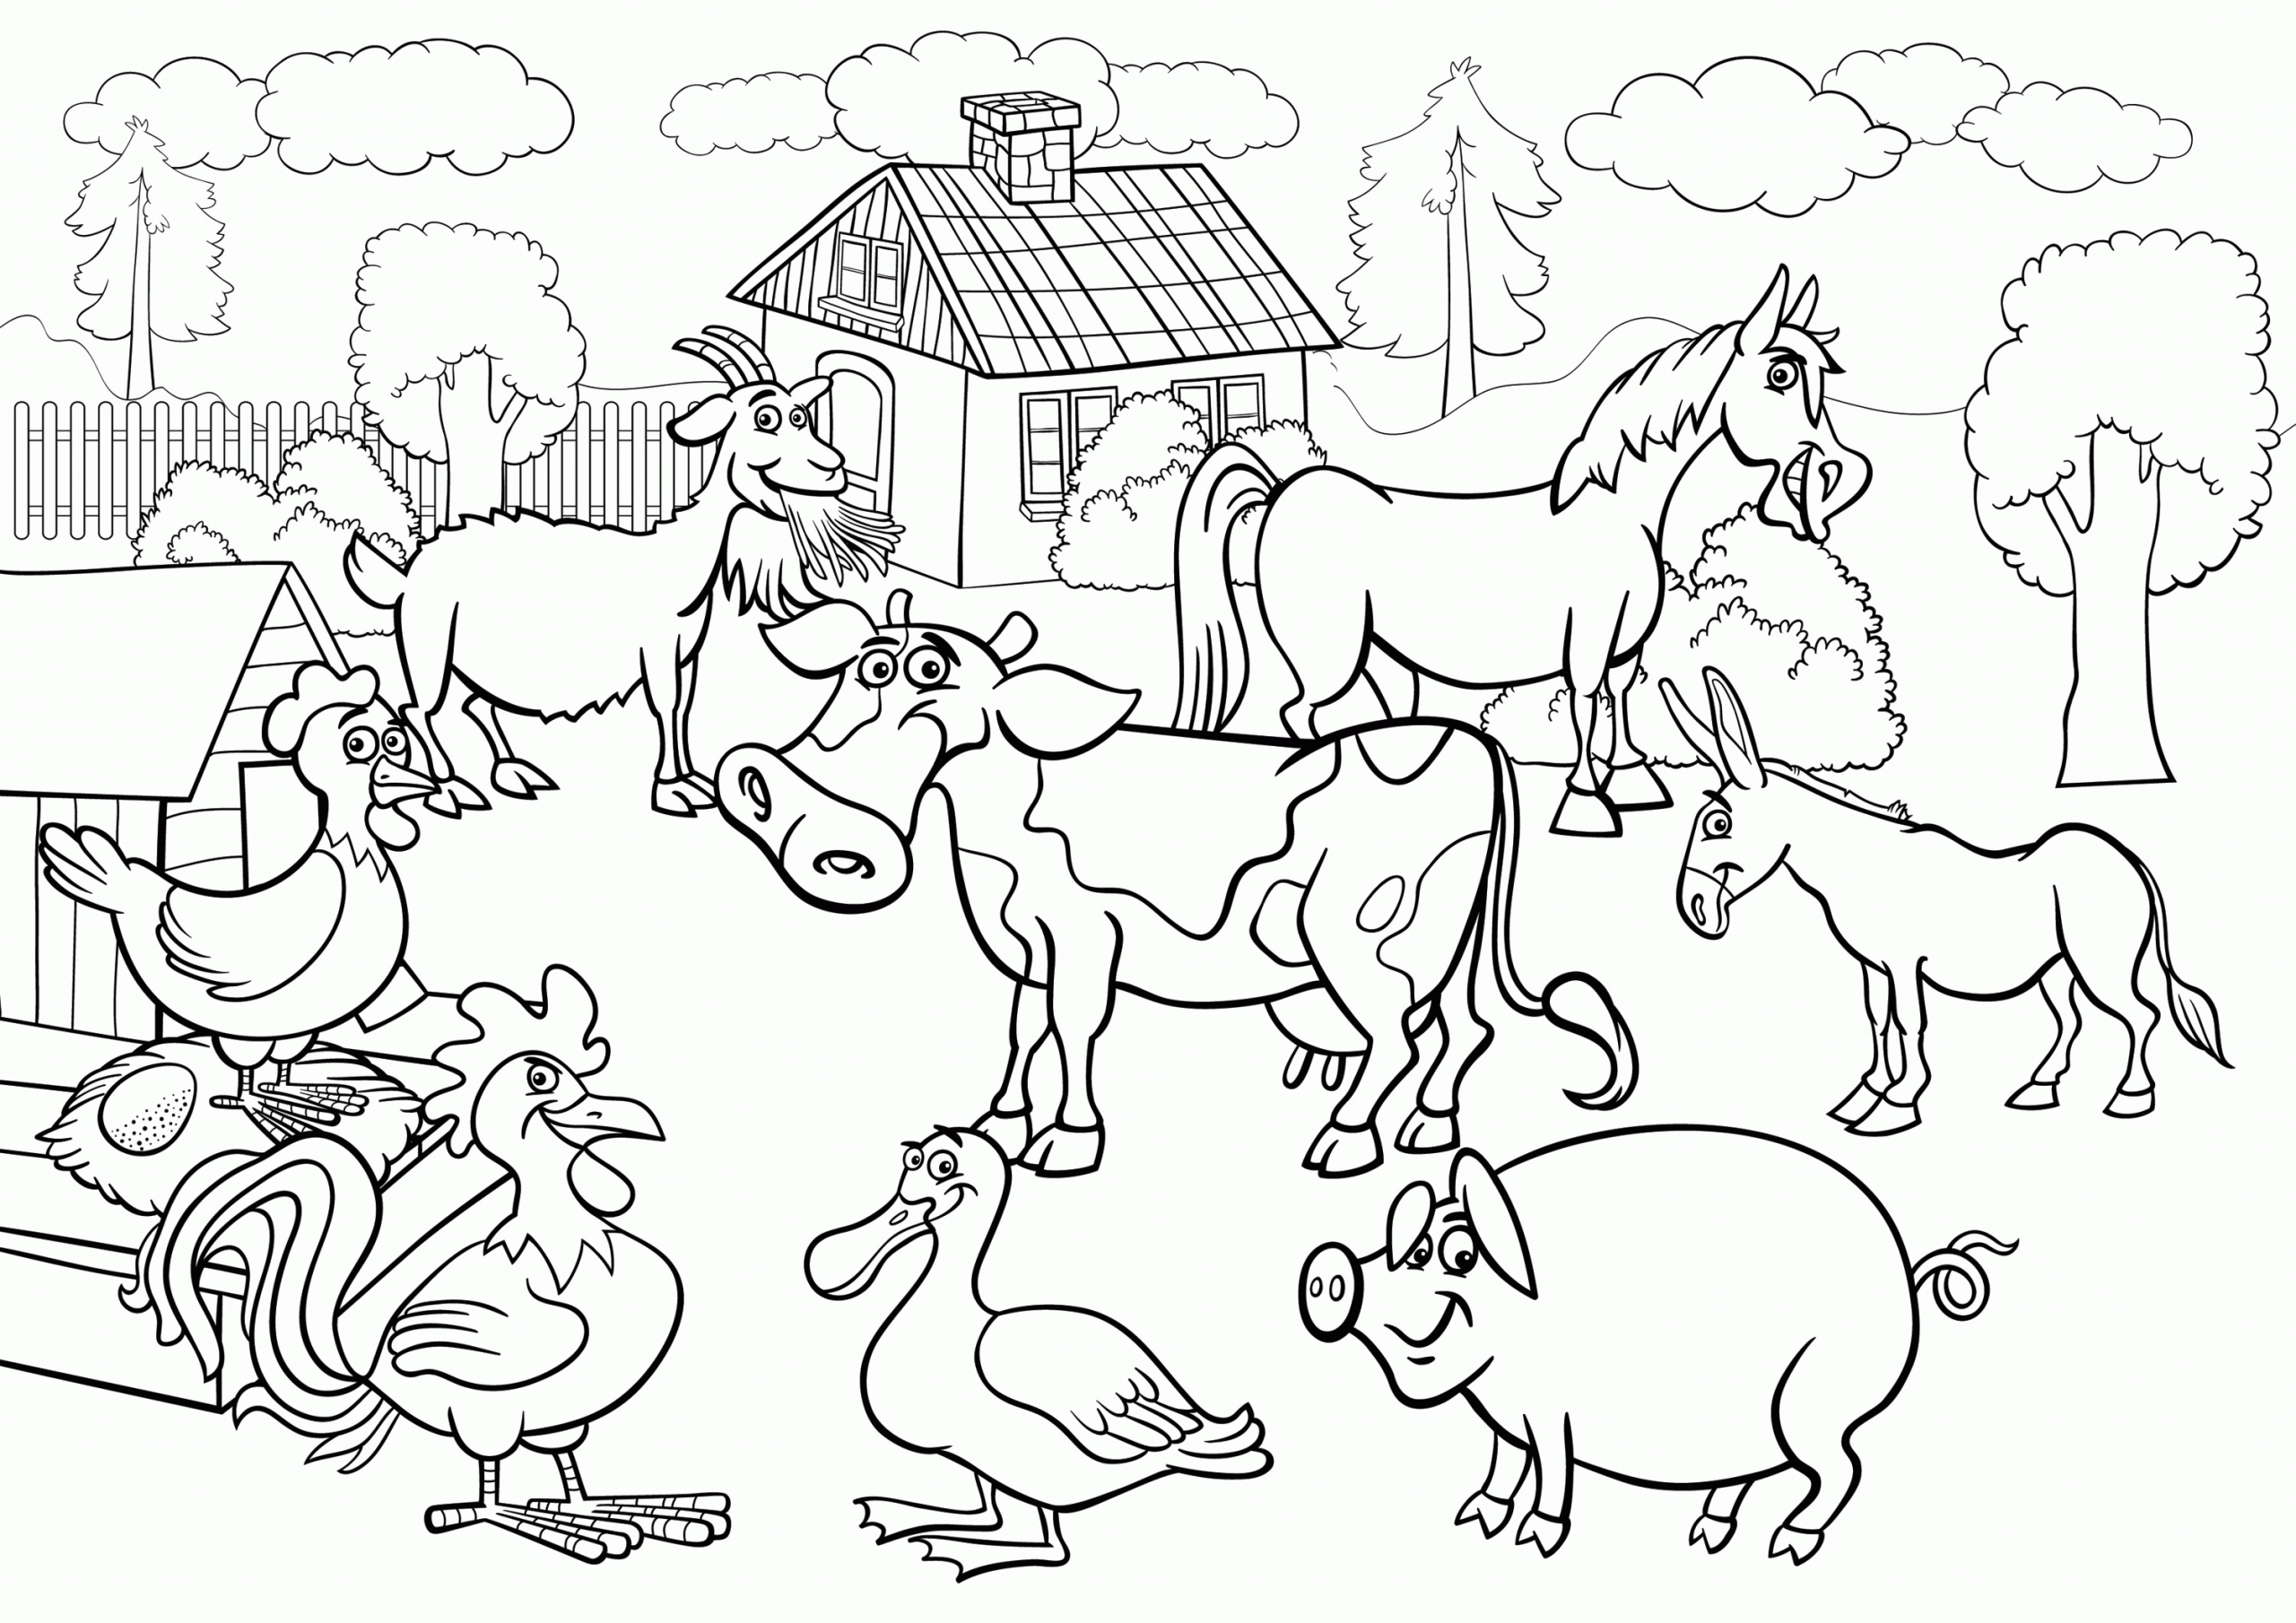 Animals in a Farm Coloring Page